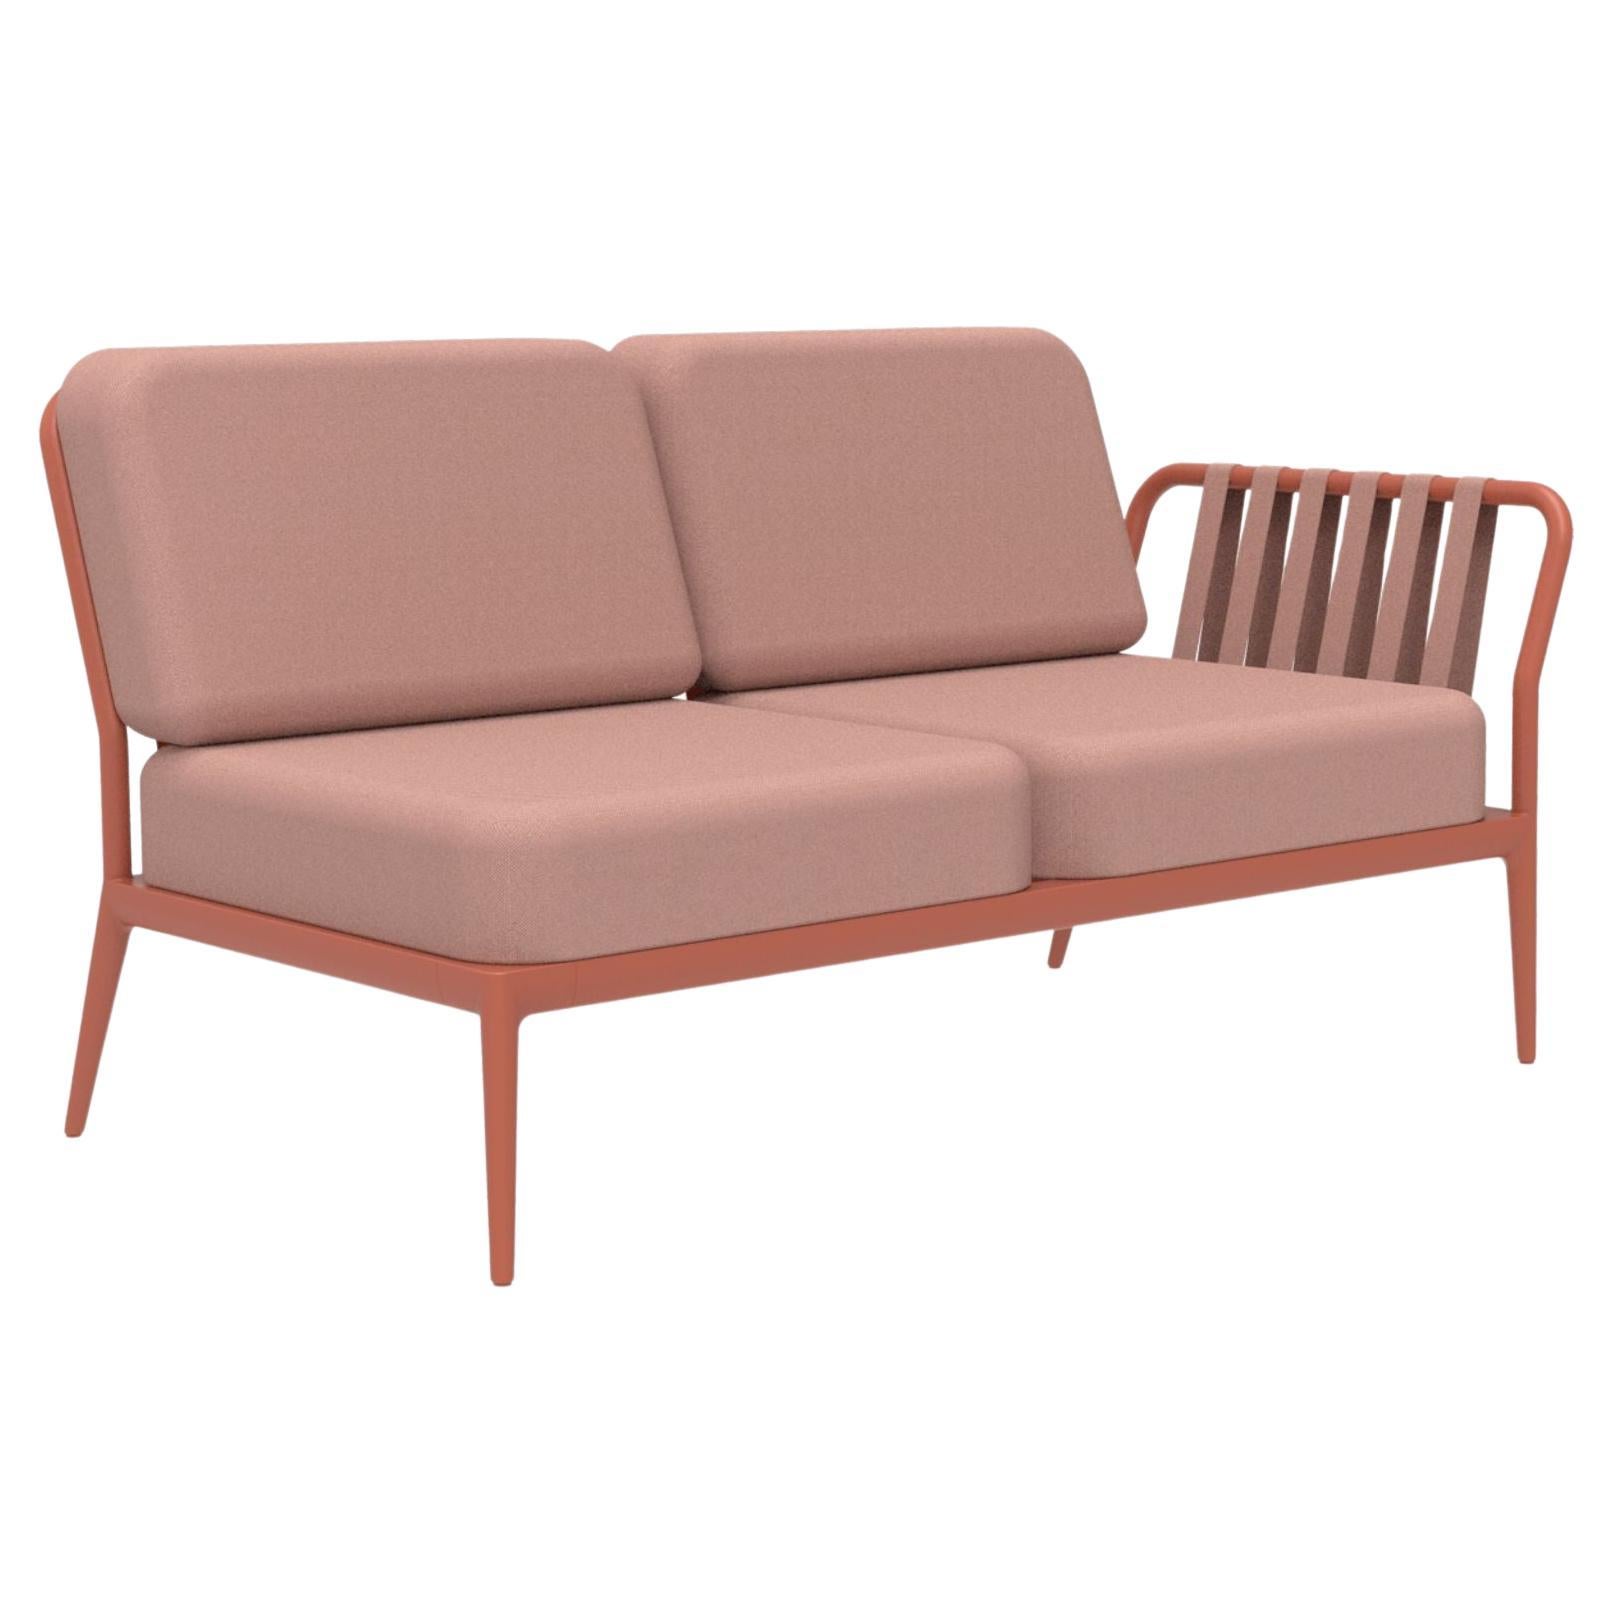 Ribbons Salmon Double Left Modular Sofa by Mowee For Sale